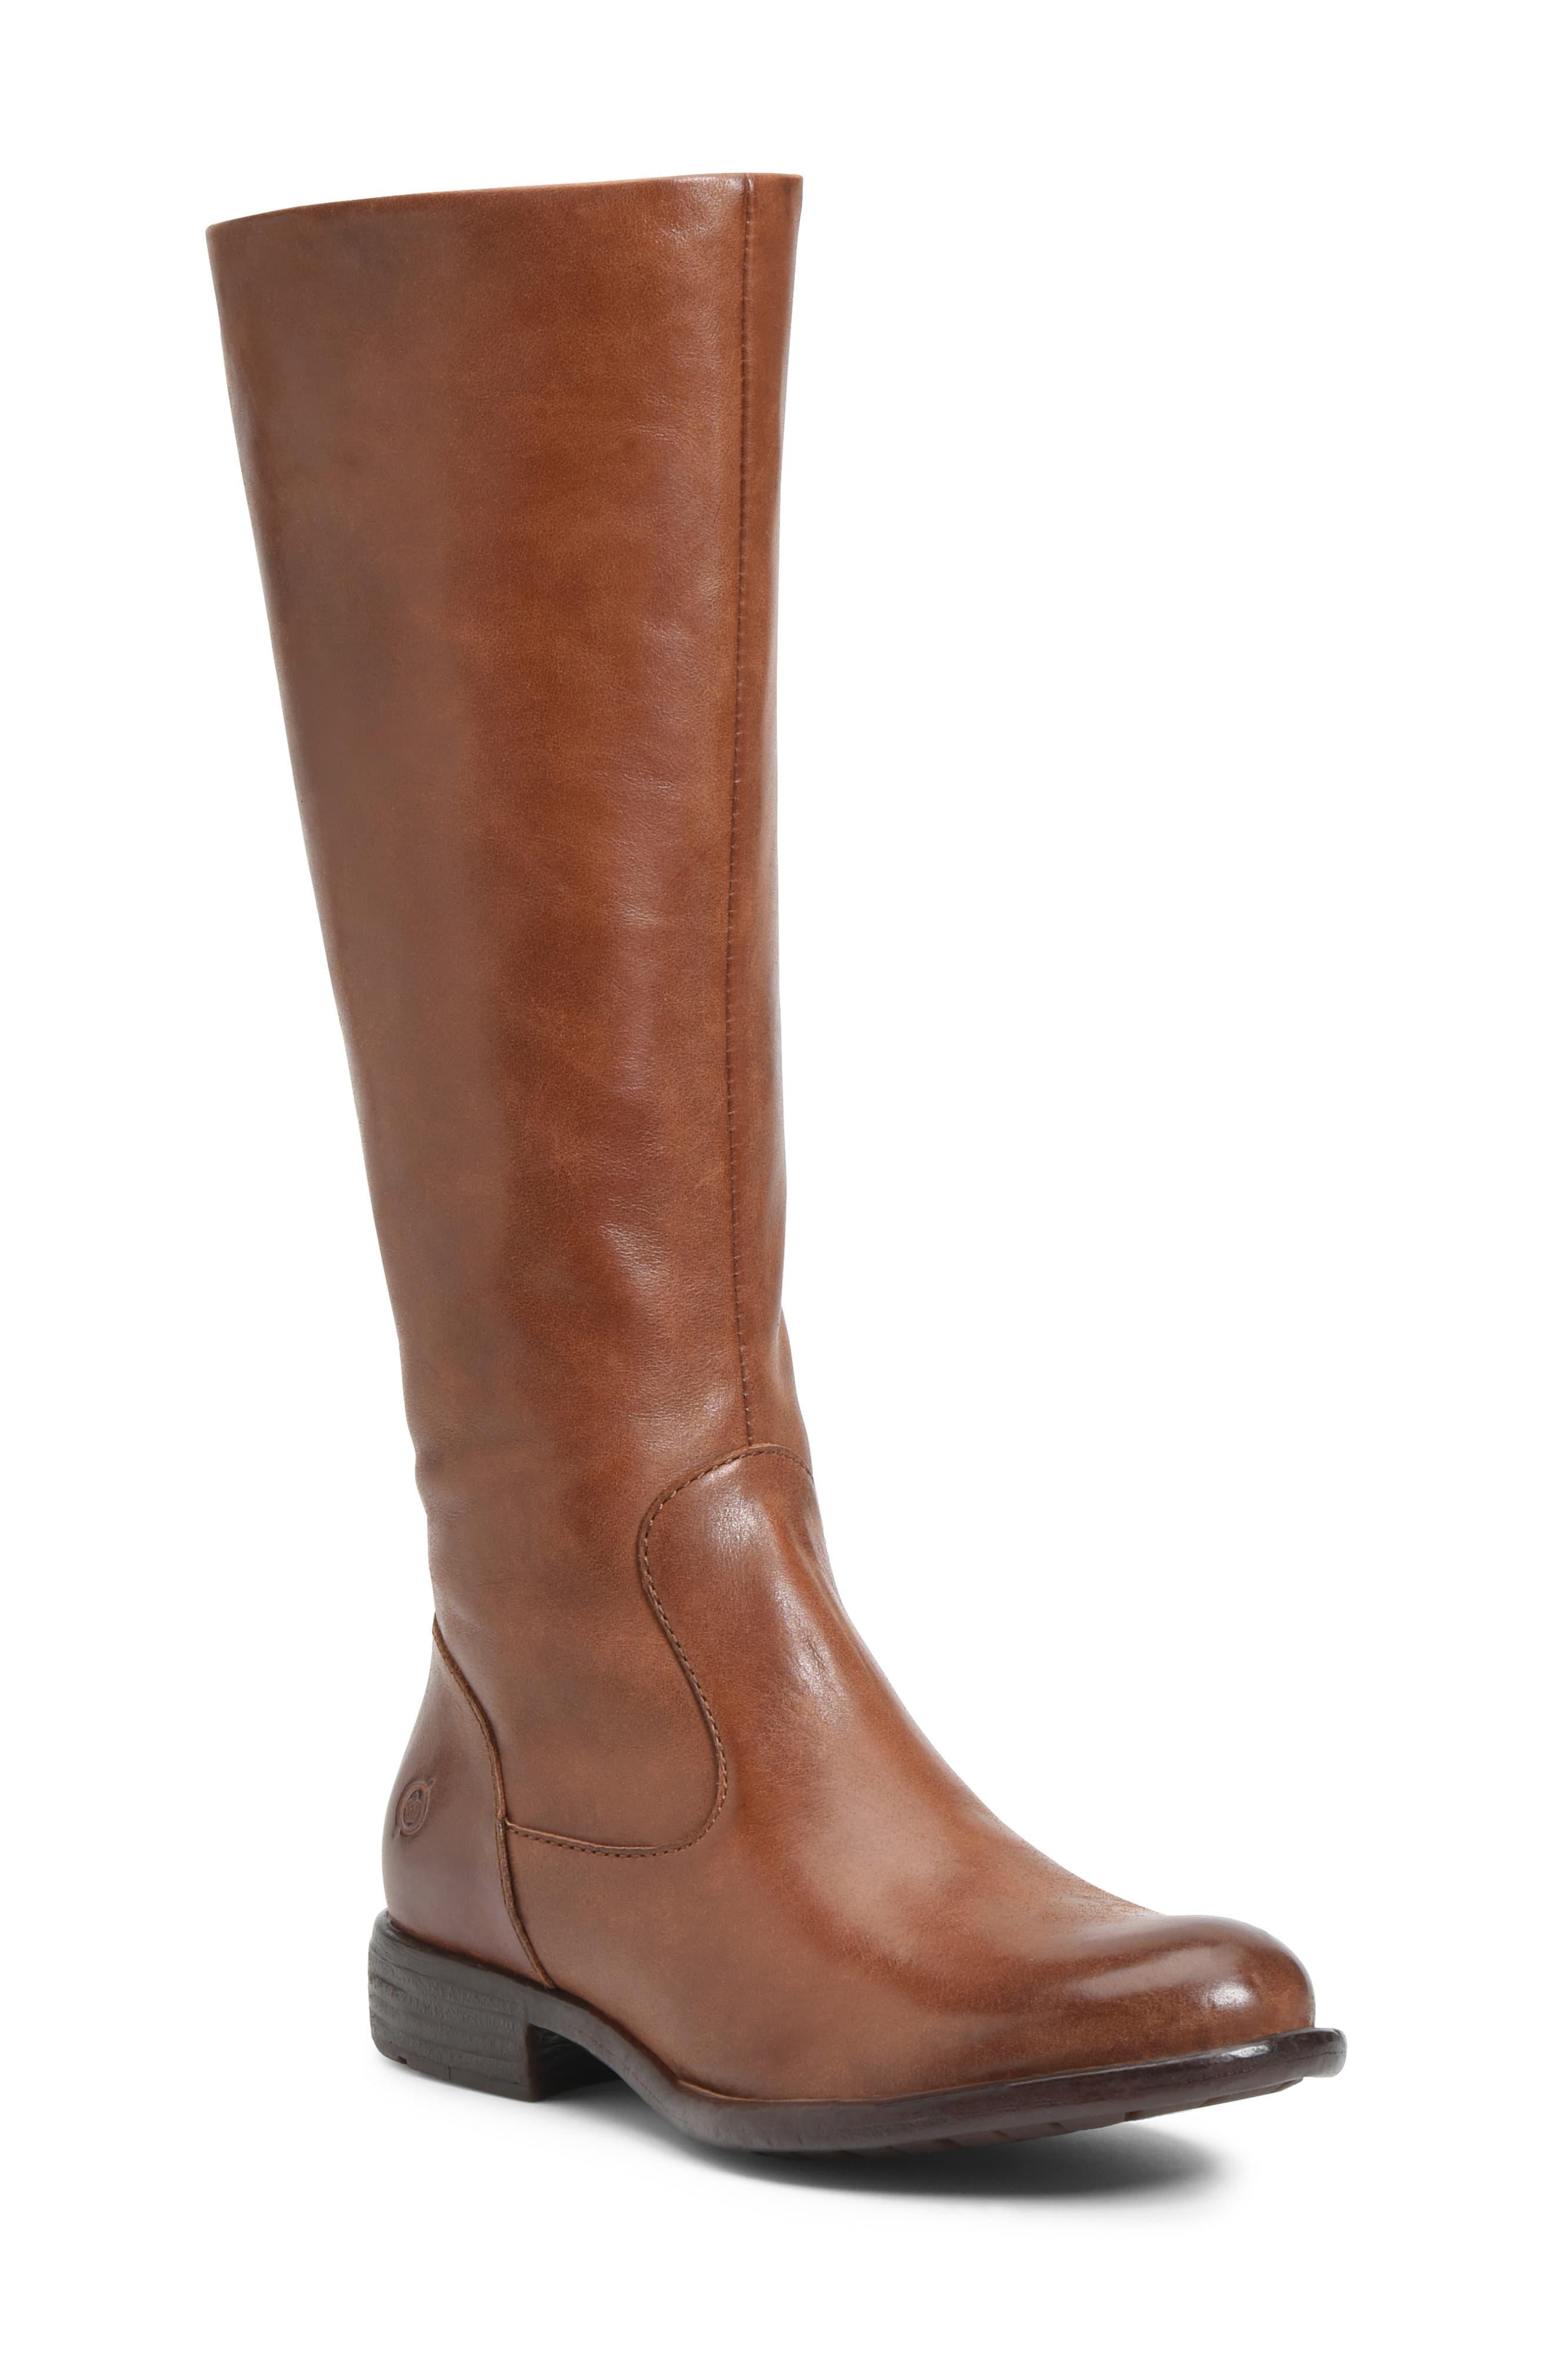 Born Børn North Riding Boot in Brown Leather (Brown) - Lyst